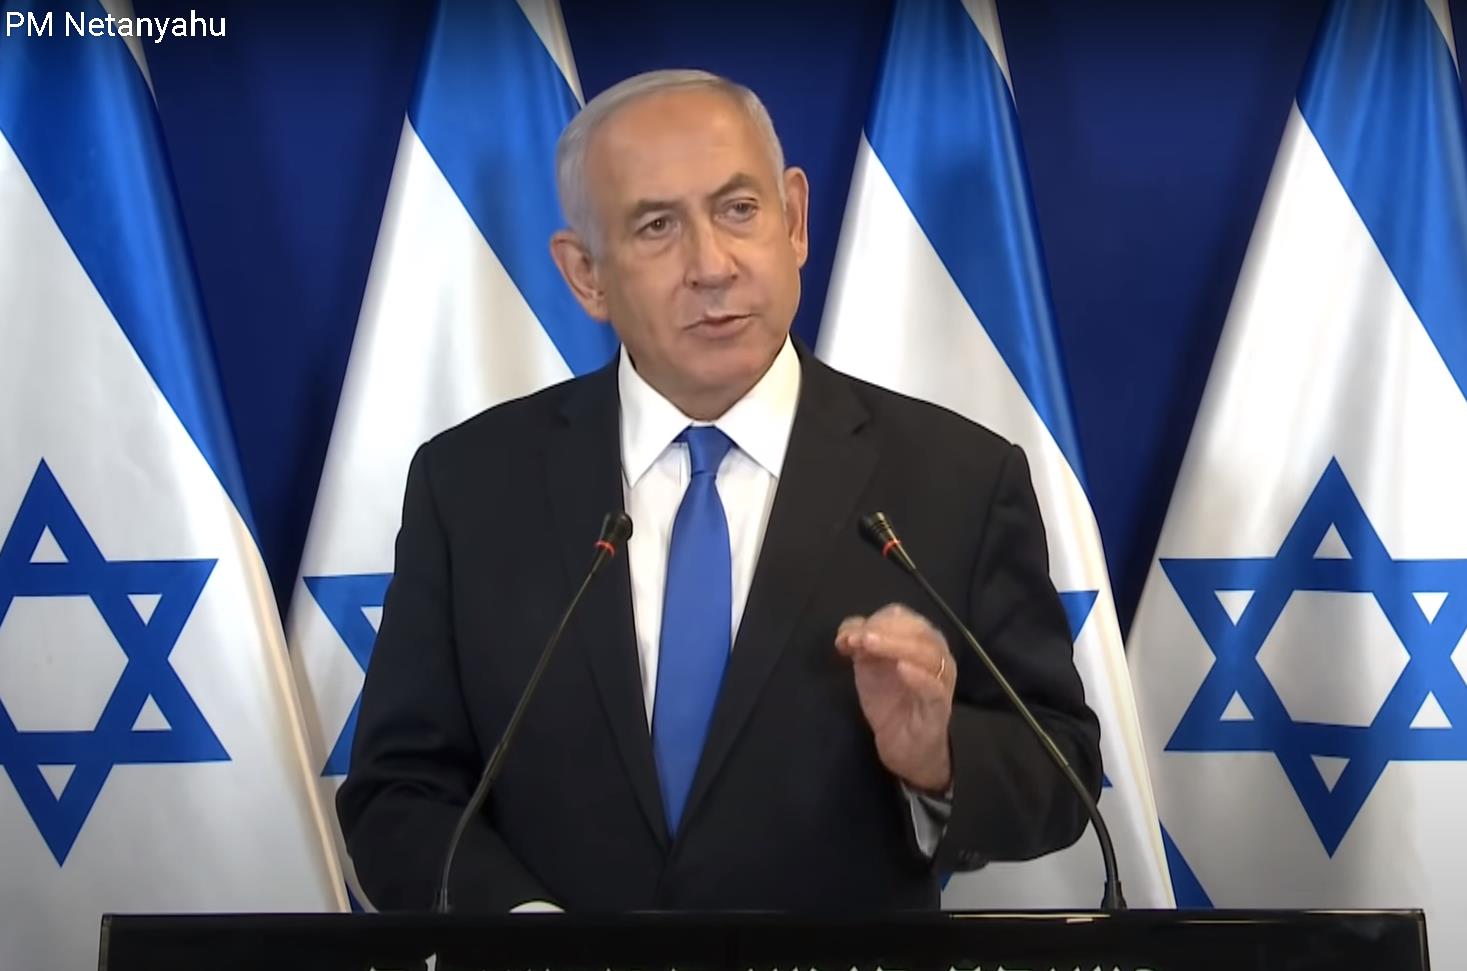 Netanyahu: Military action will continue until Israel's "security" is achieved